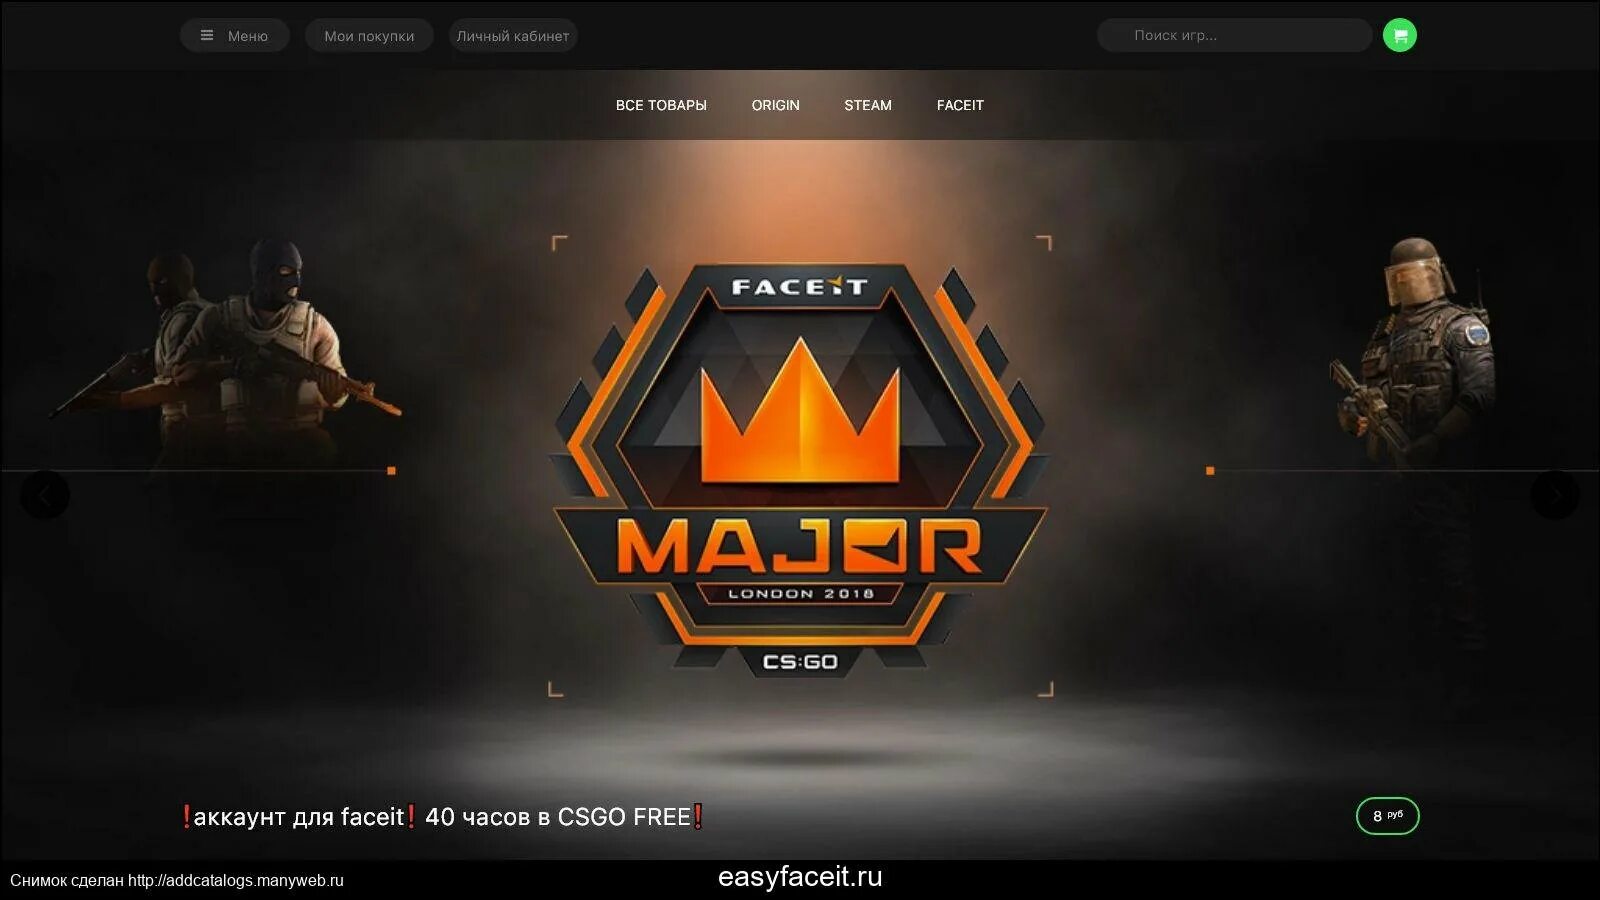 Your account requires the following faceit. Оформление для фейсита. Фото для фейсита. Картинки для фейсит. Фейсит мод.